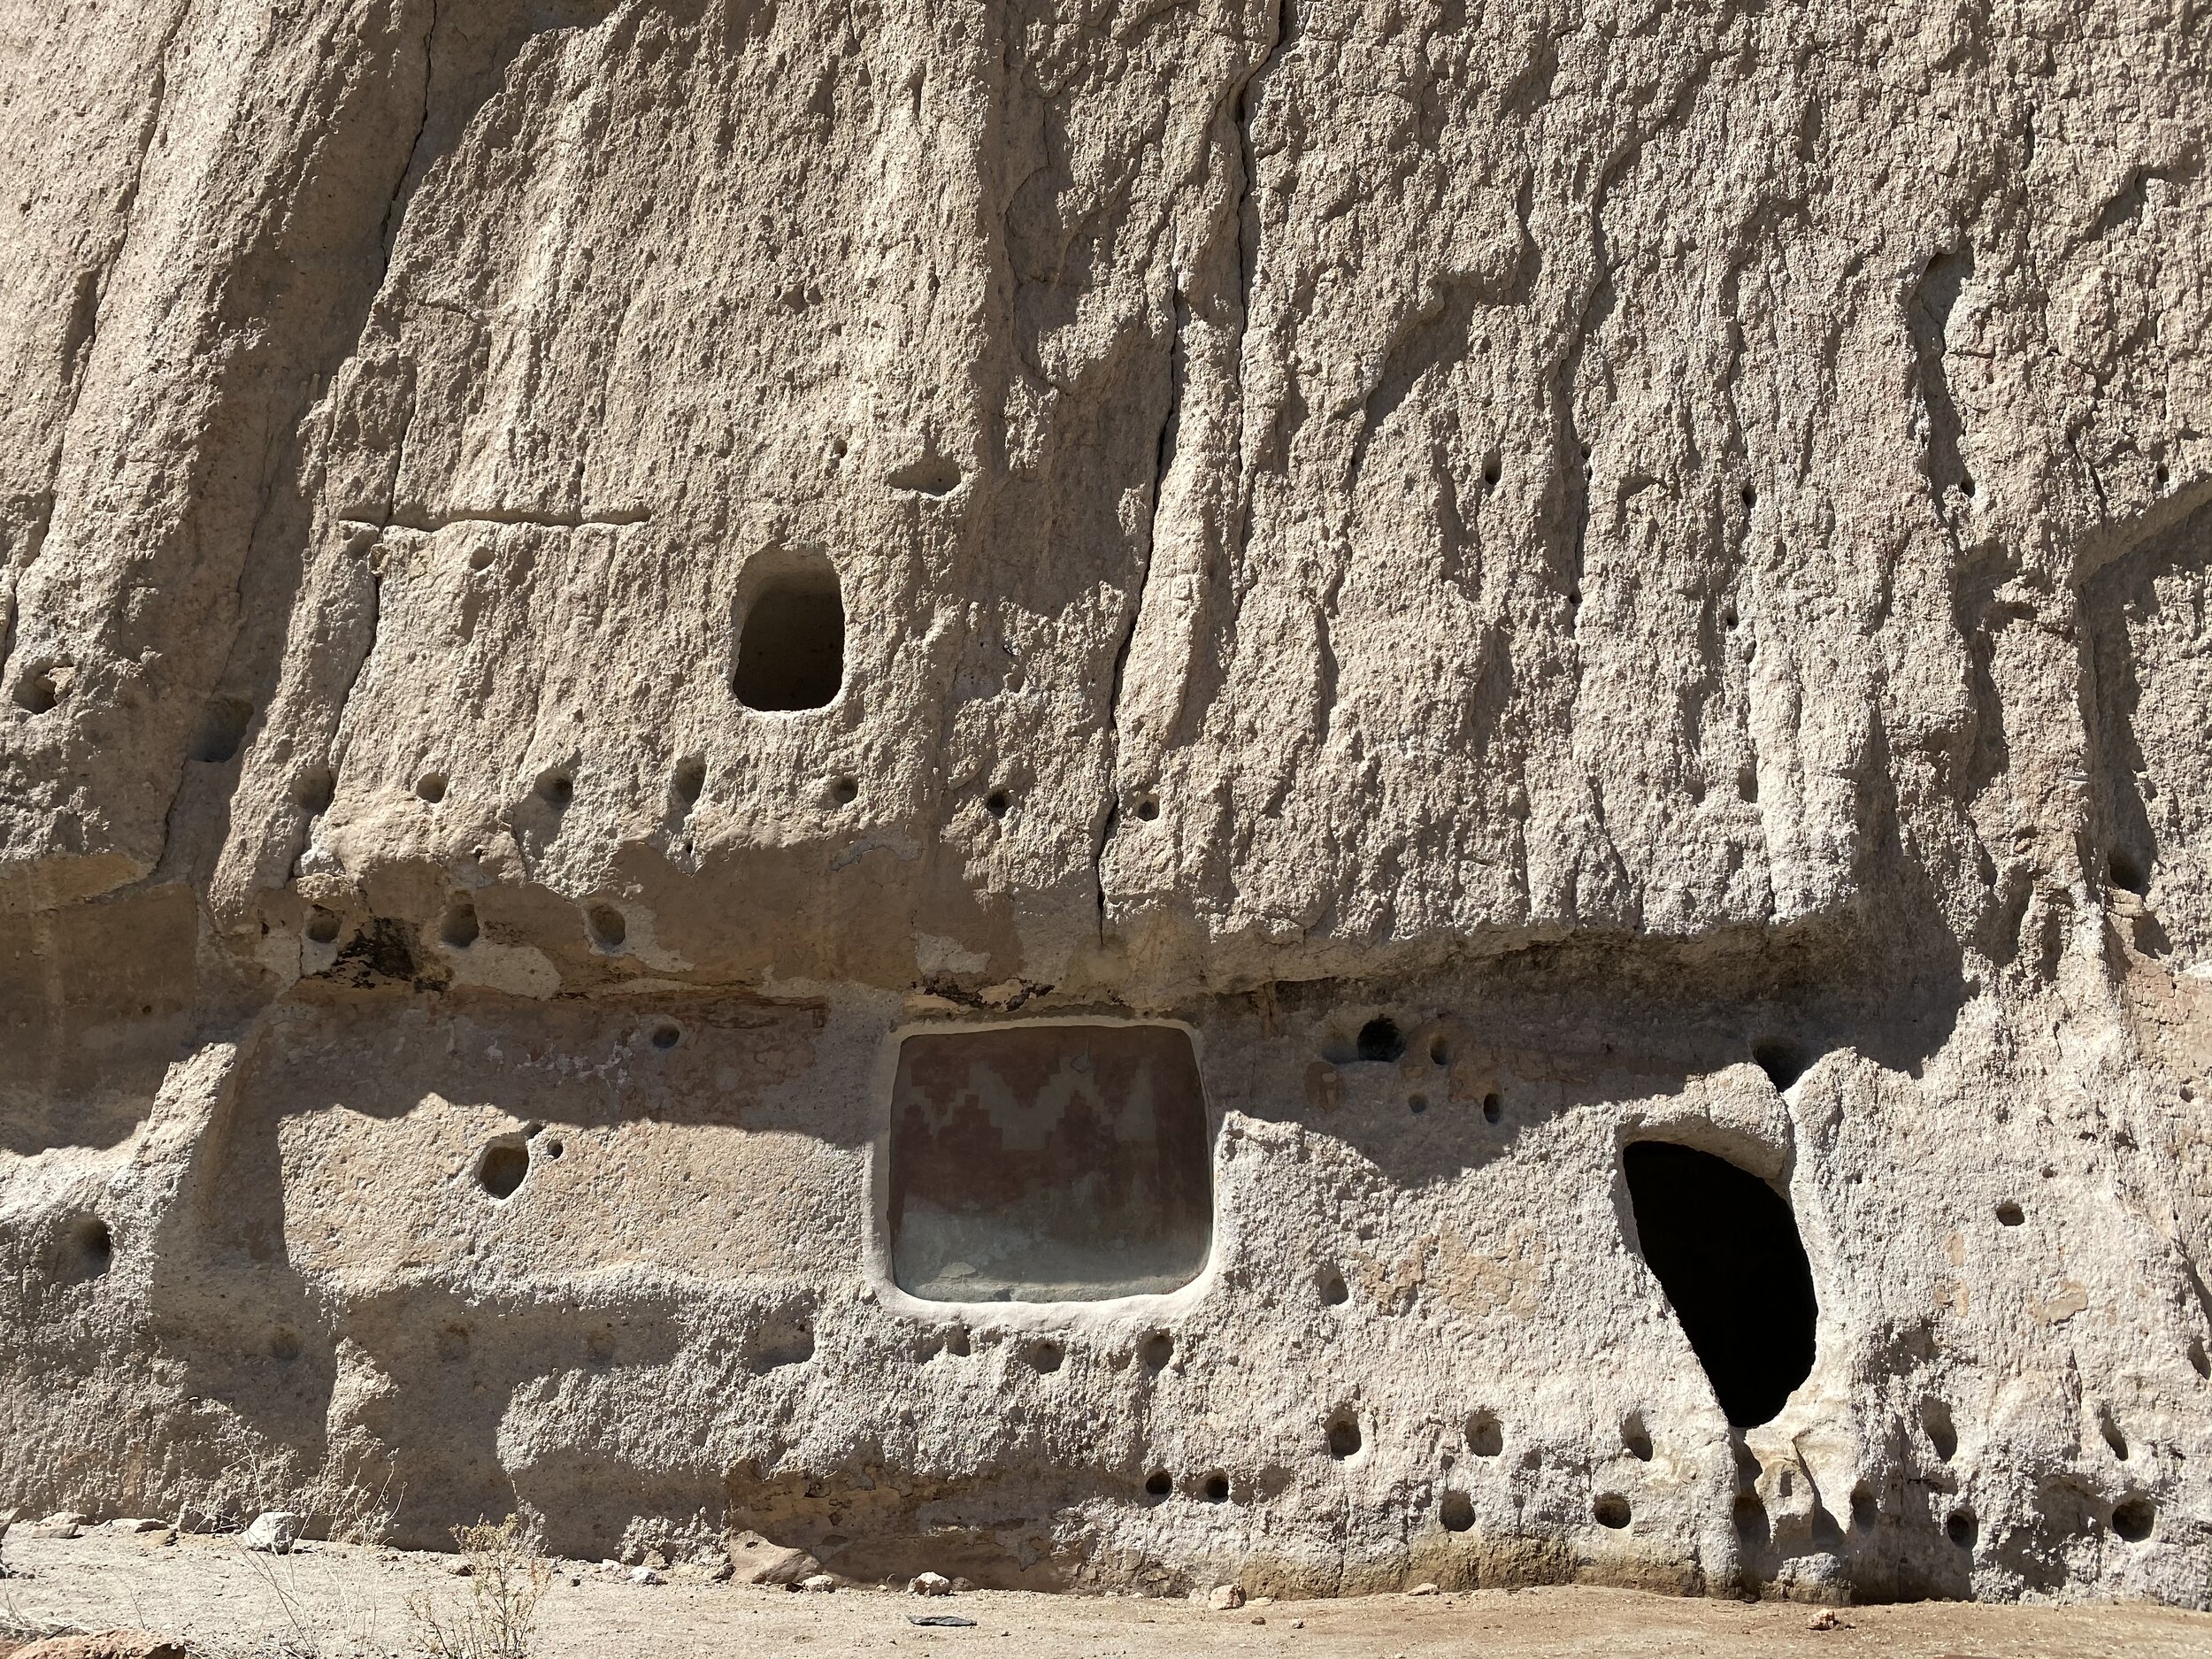 Ancient petroglyphs and original art on a cliff at Bandelier National Monument